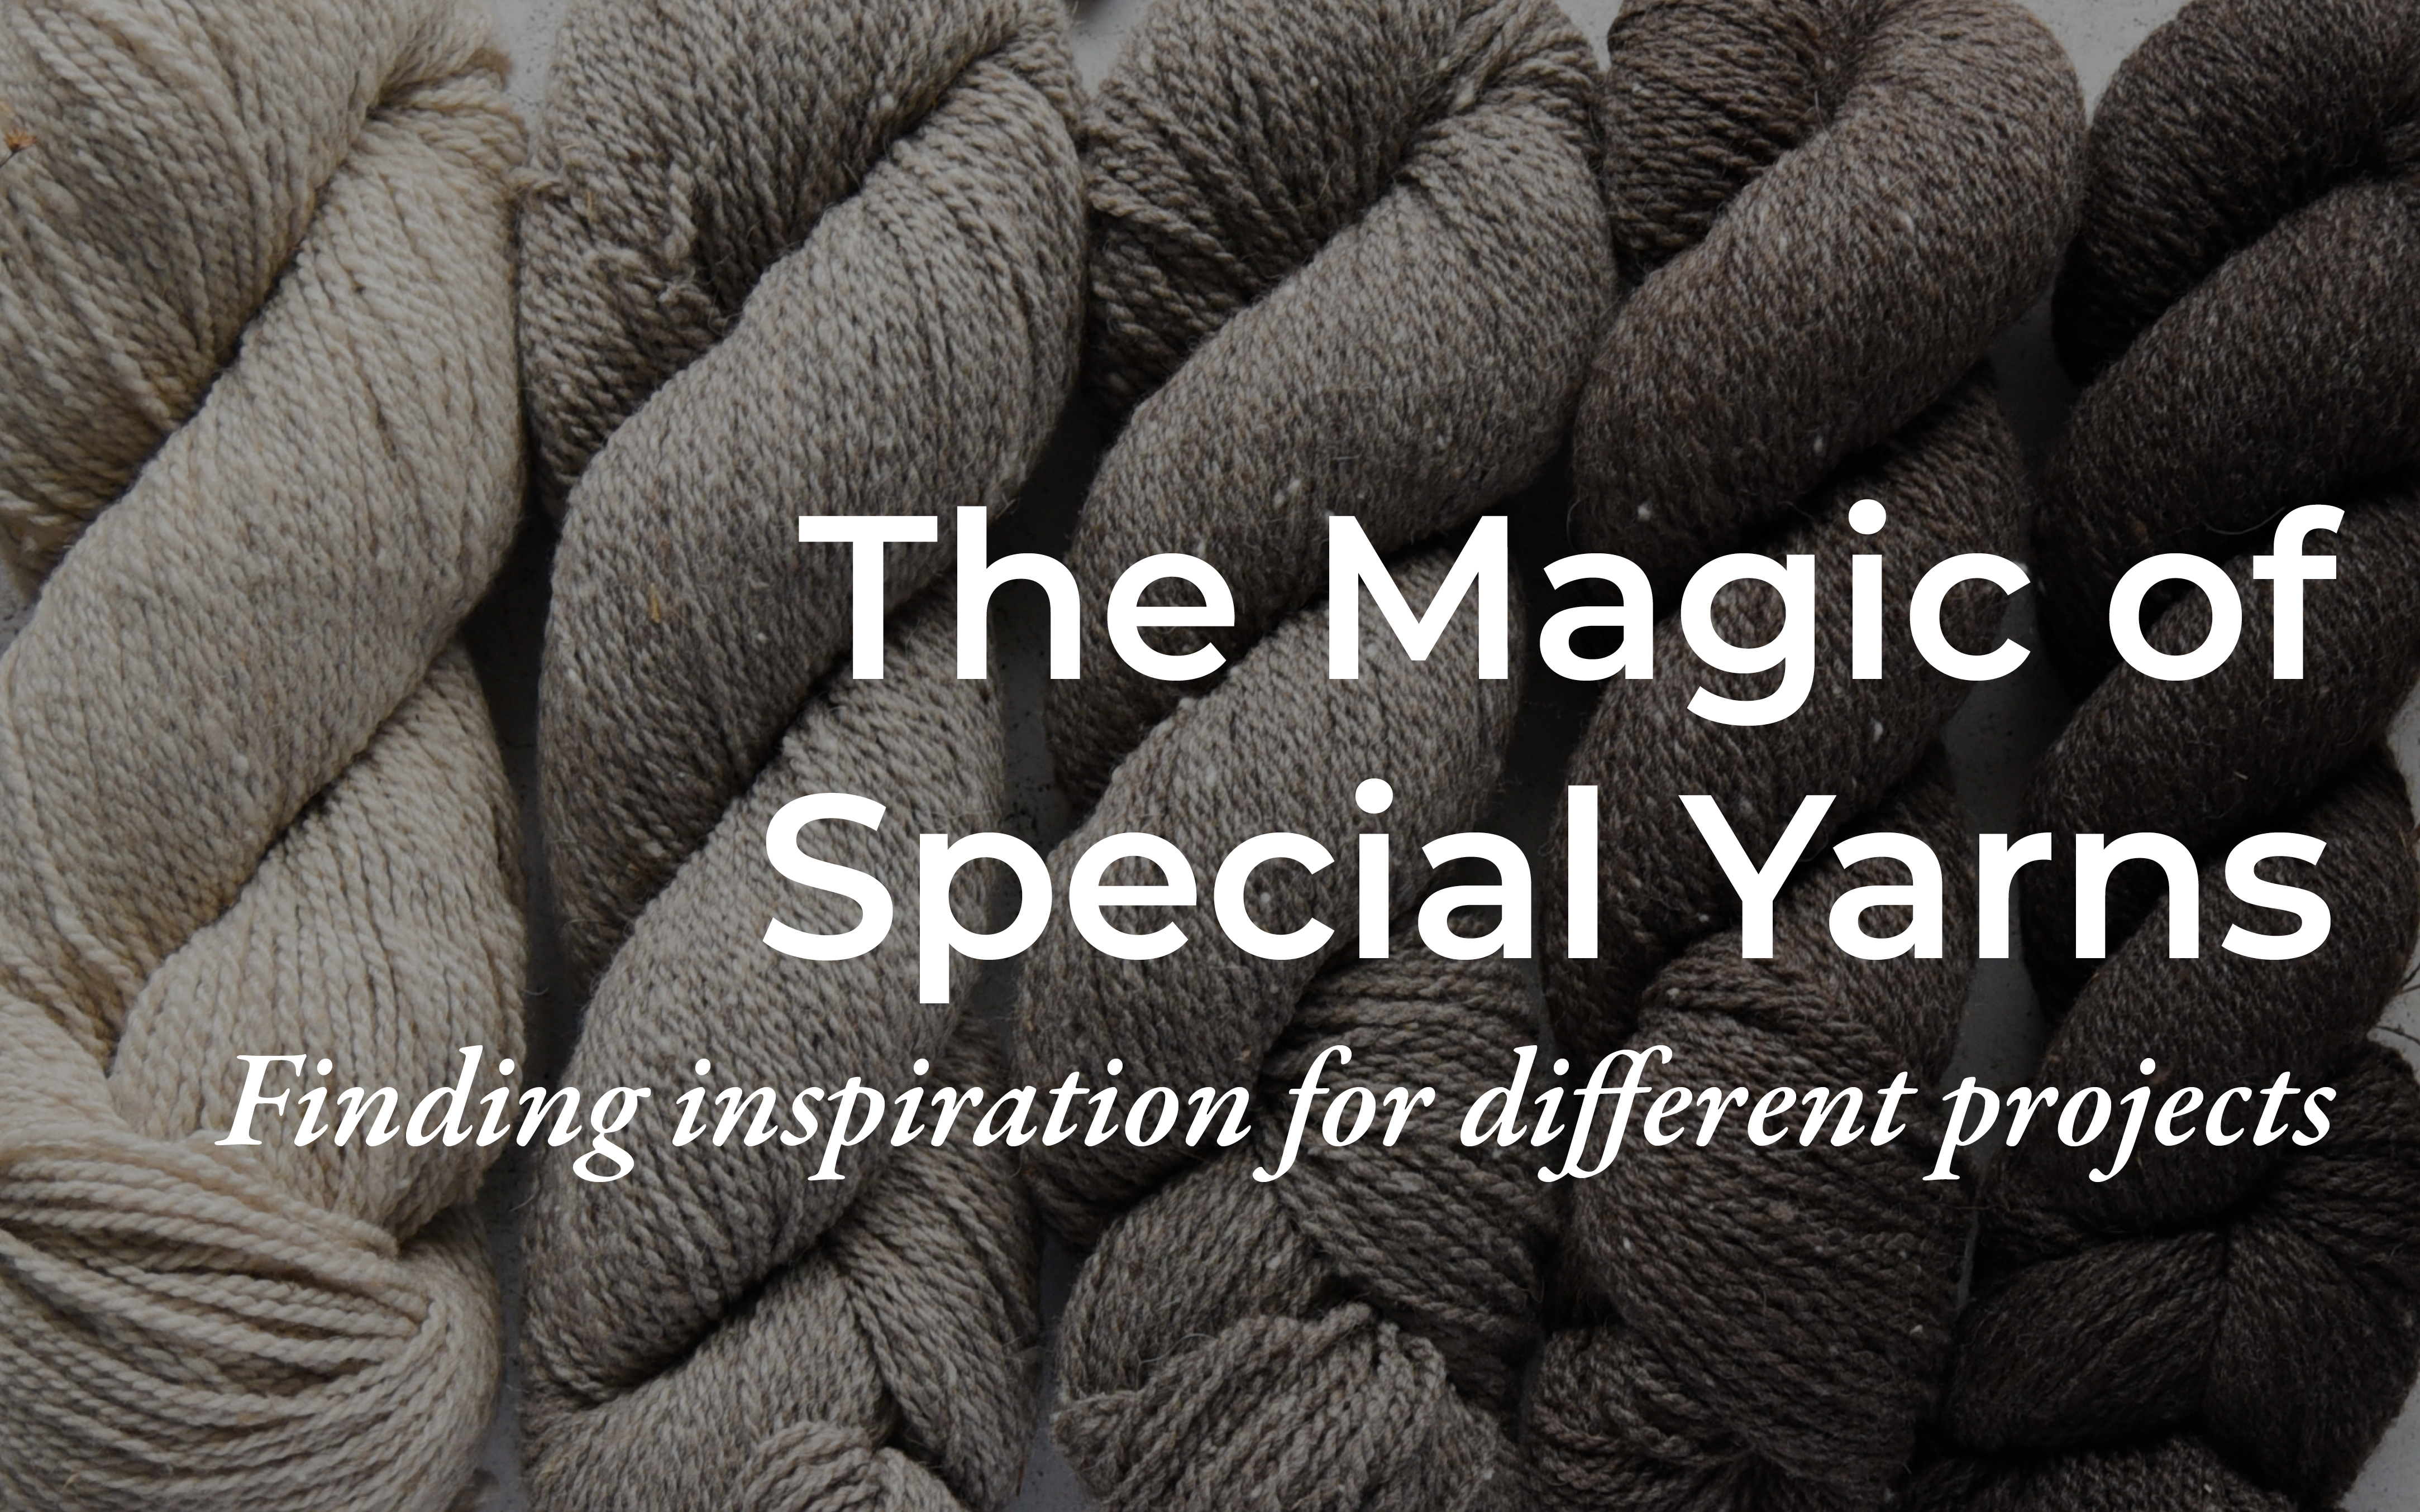 The Magic of Special Yarn